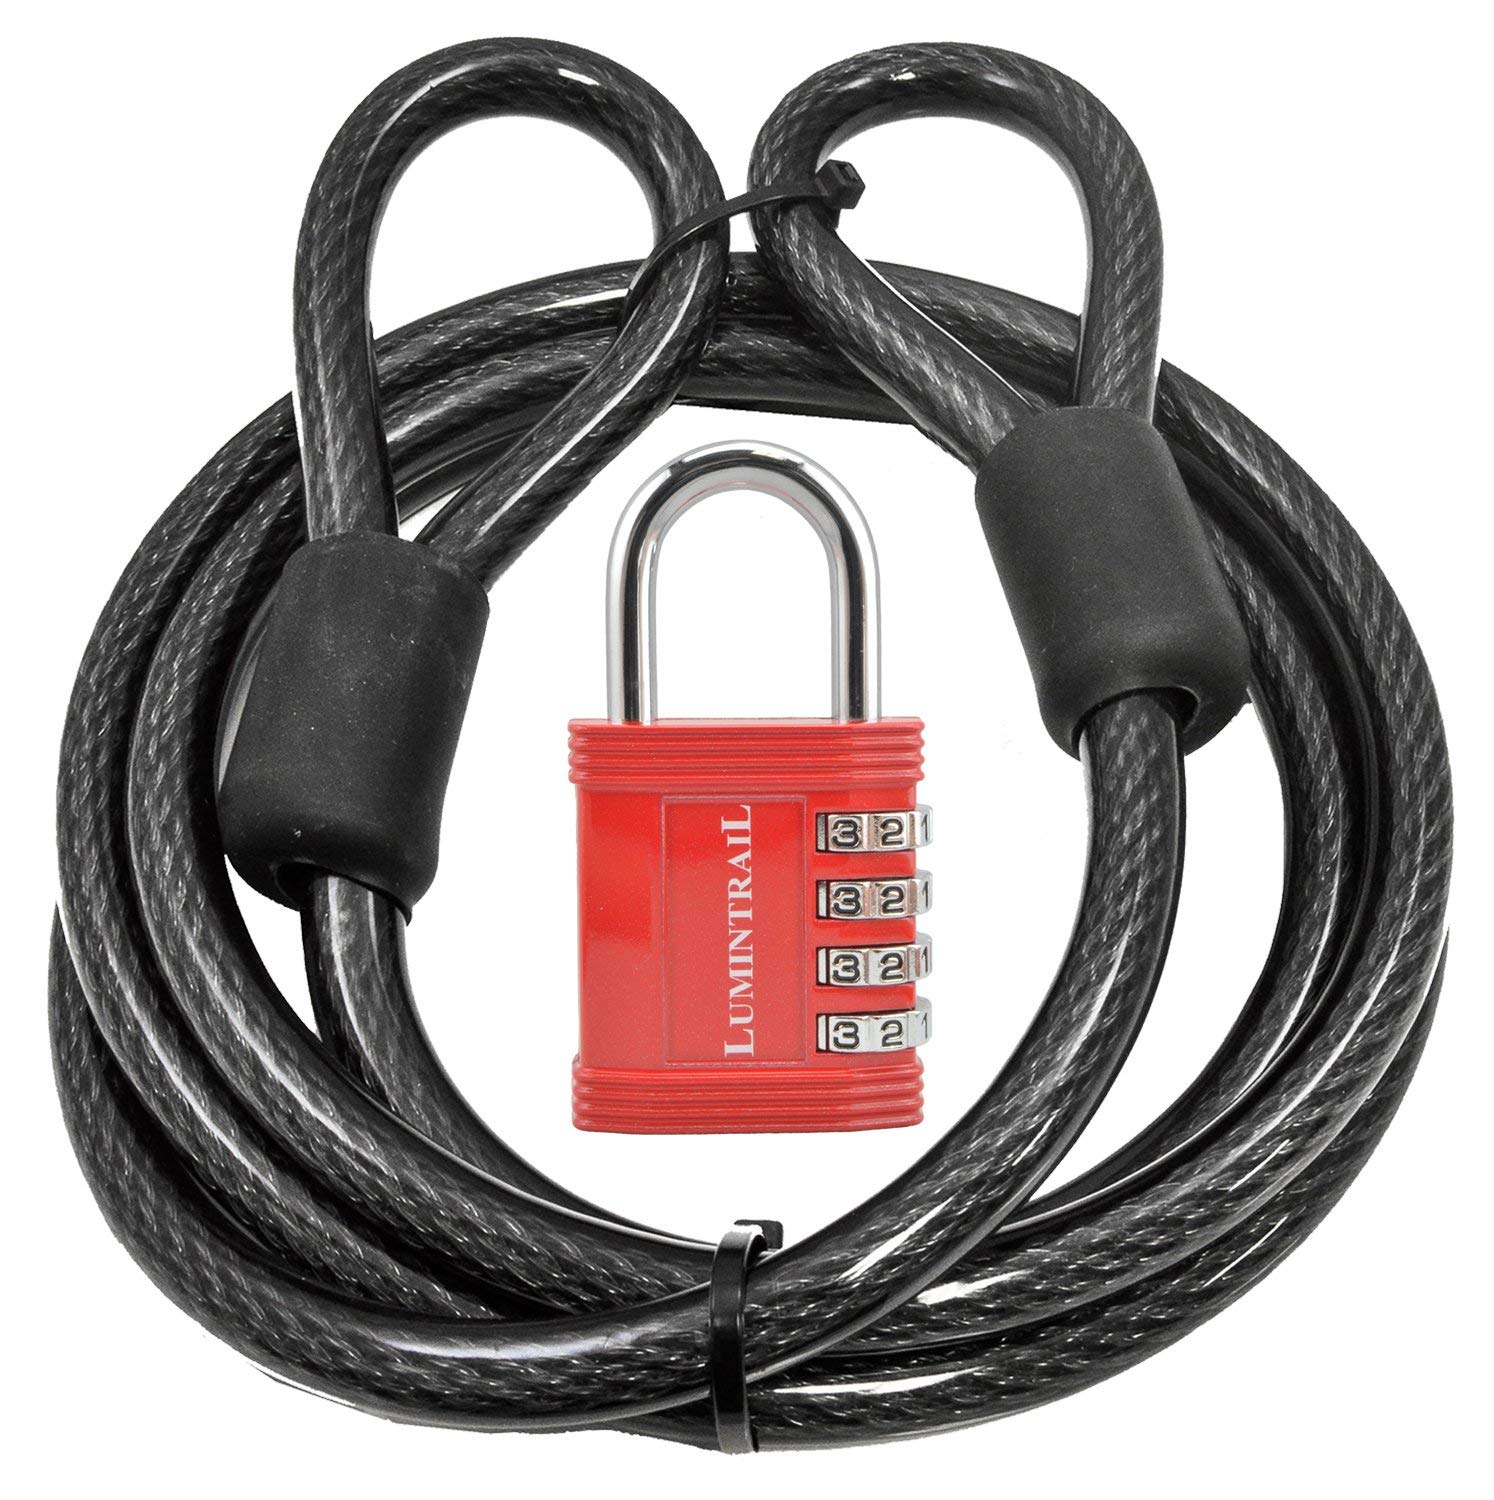 Pro Iron Security Lock combo Combination Cable Lock with LED Light 1//2 /" X 5 ft